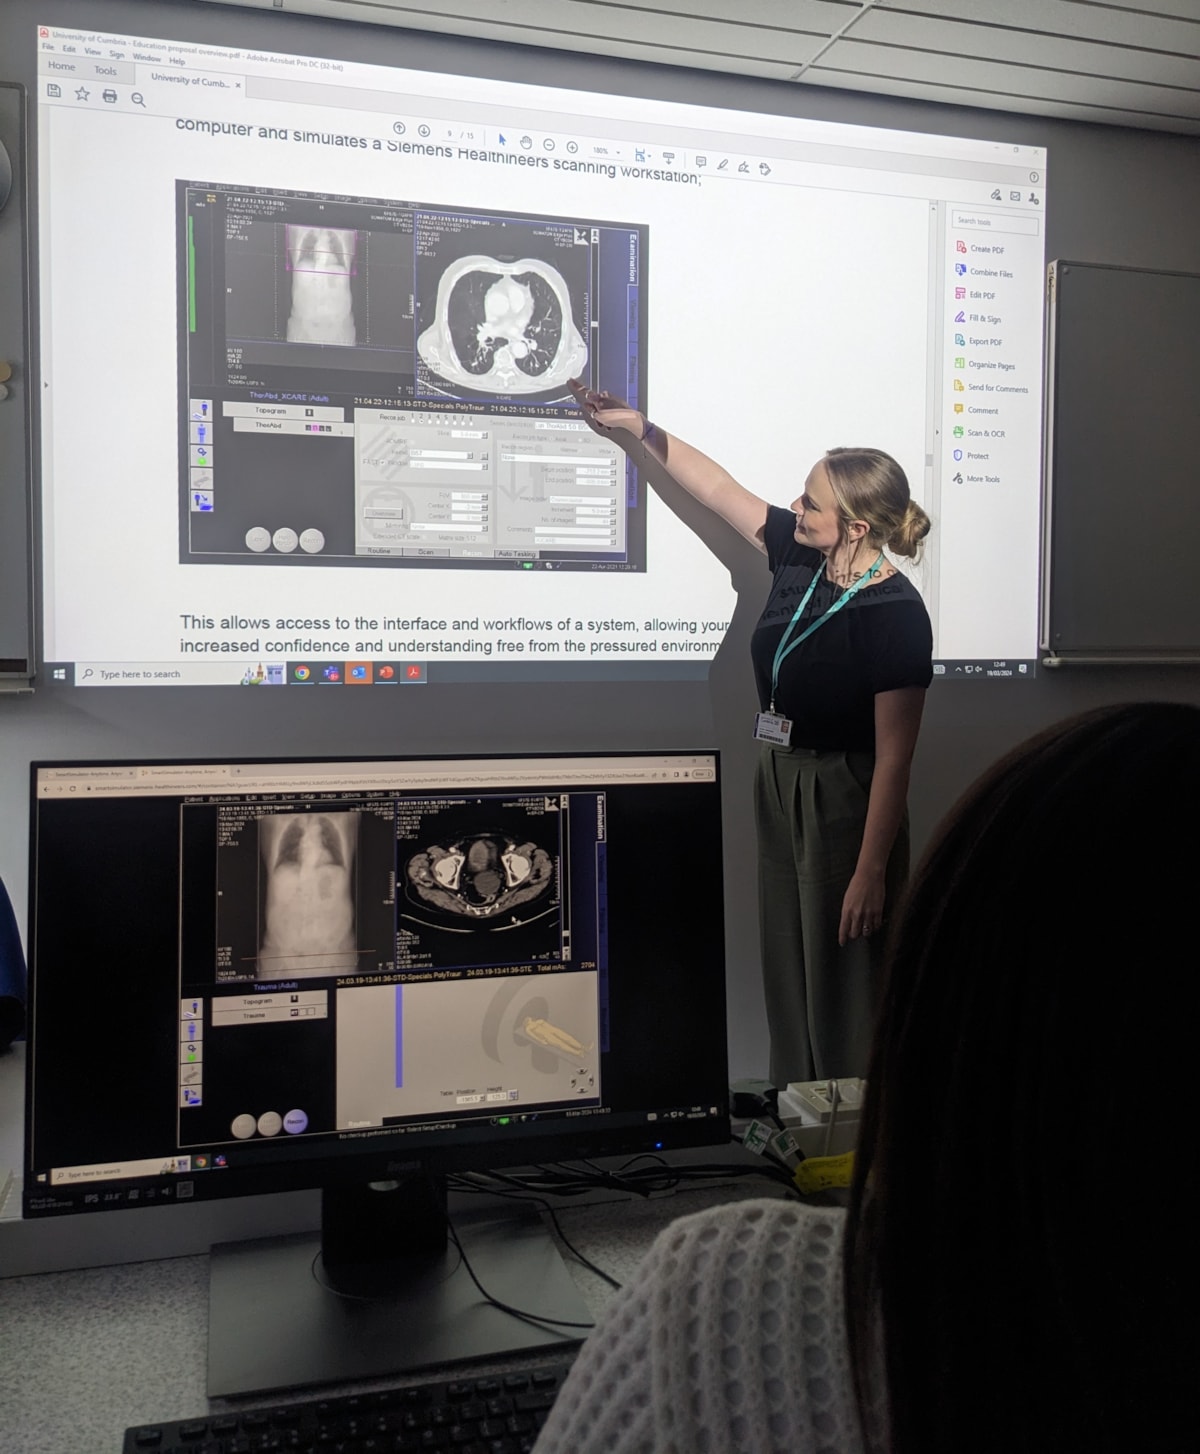 Laura Hemmings, lecturer in Medical Imaging at the University of Cumbria, uses SmartSimulator from Siemens Healthineers to simulate learning that mimics what students will see in a clinical environment.
CREDIT: Siemens Healthineers